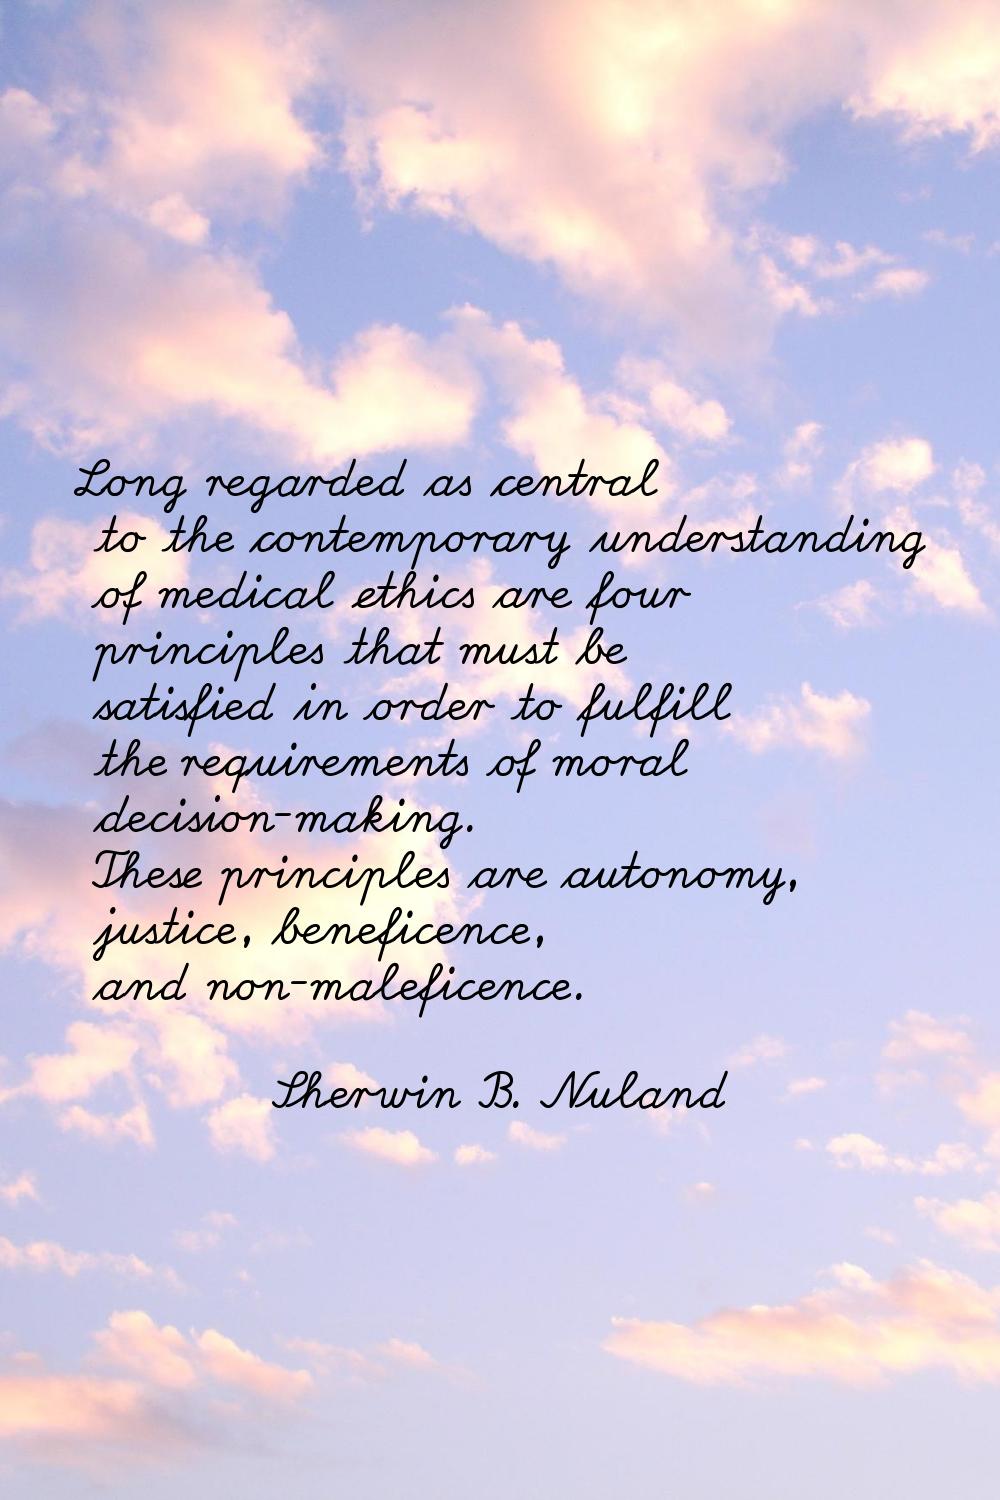 Long regarded as central to the contemporary understanding of medical ethics are four principles th